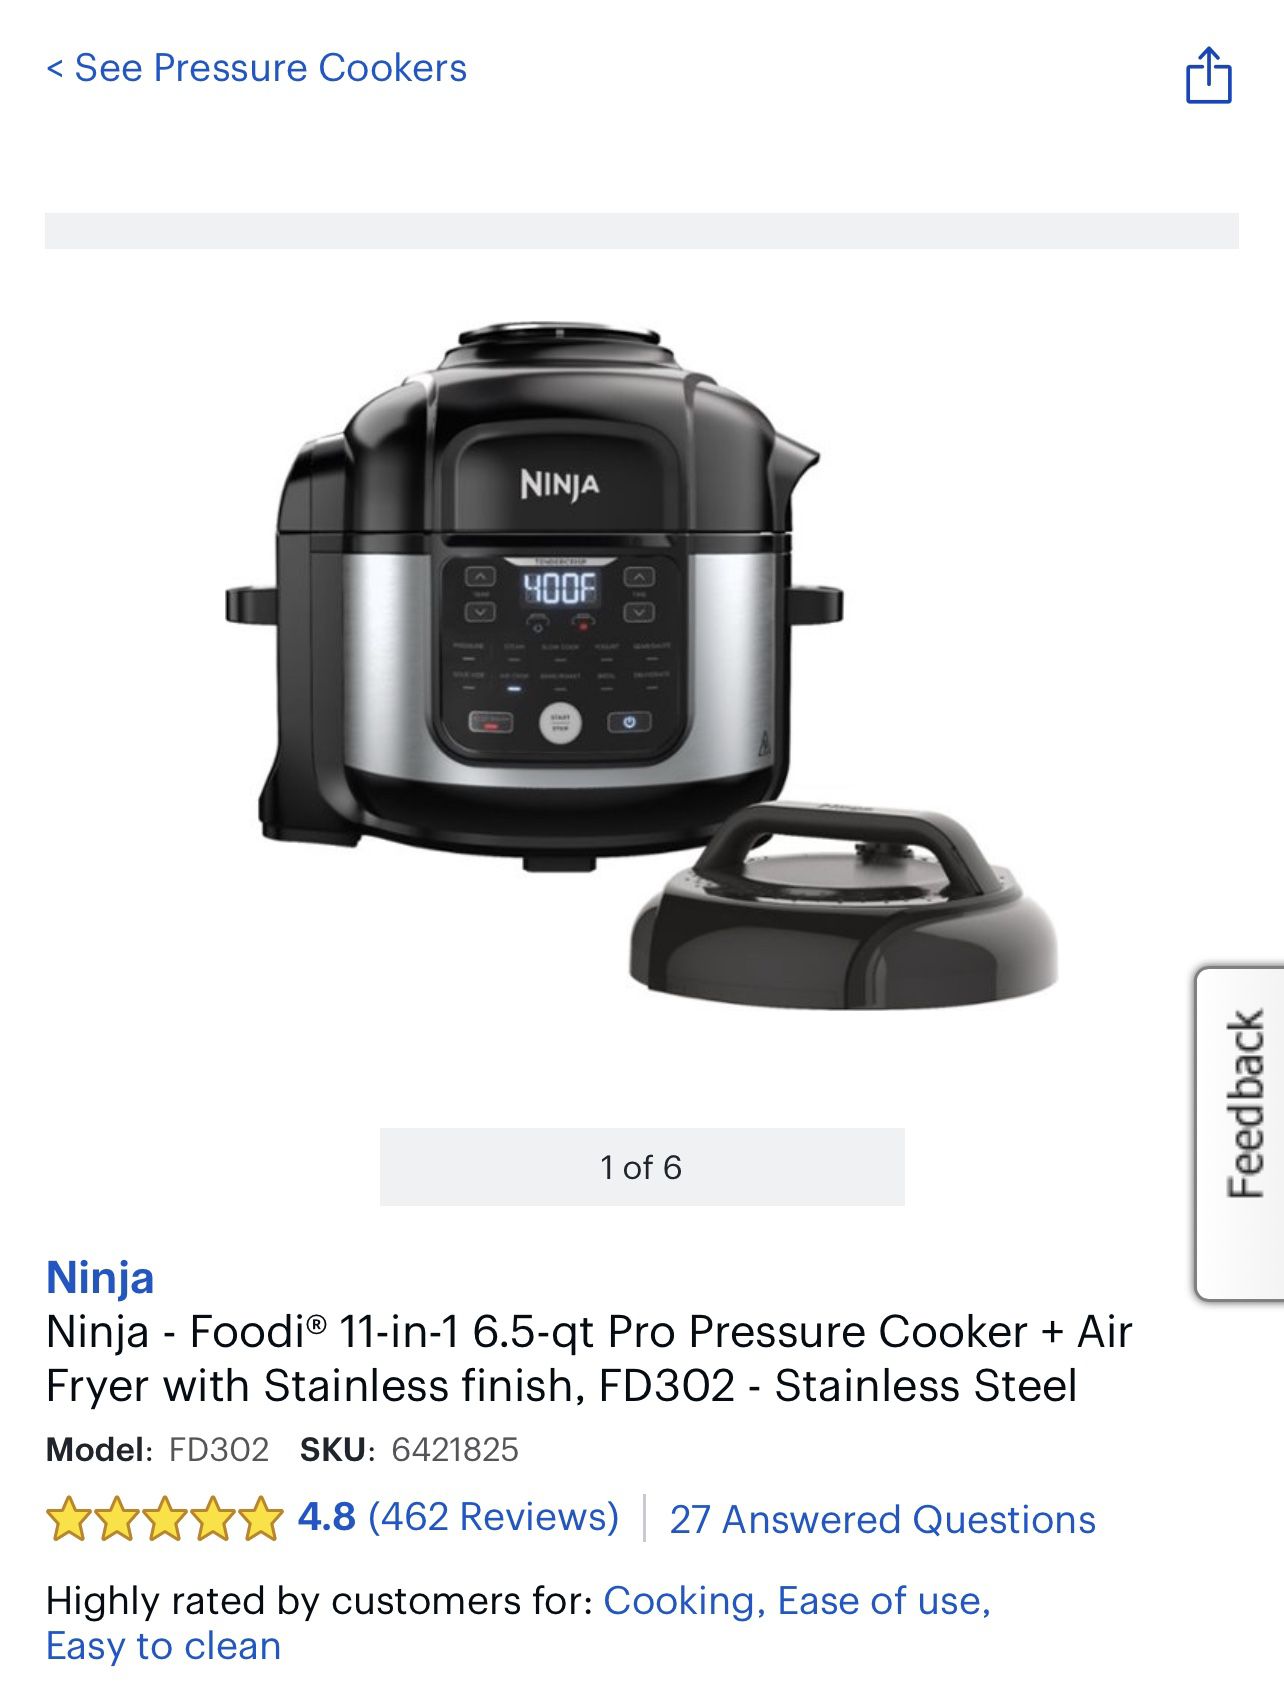 Ninja - Foodi 11-in-1 6.5-qt Pro Pressure Cooker + Air Fryer with Stainless  New